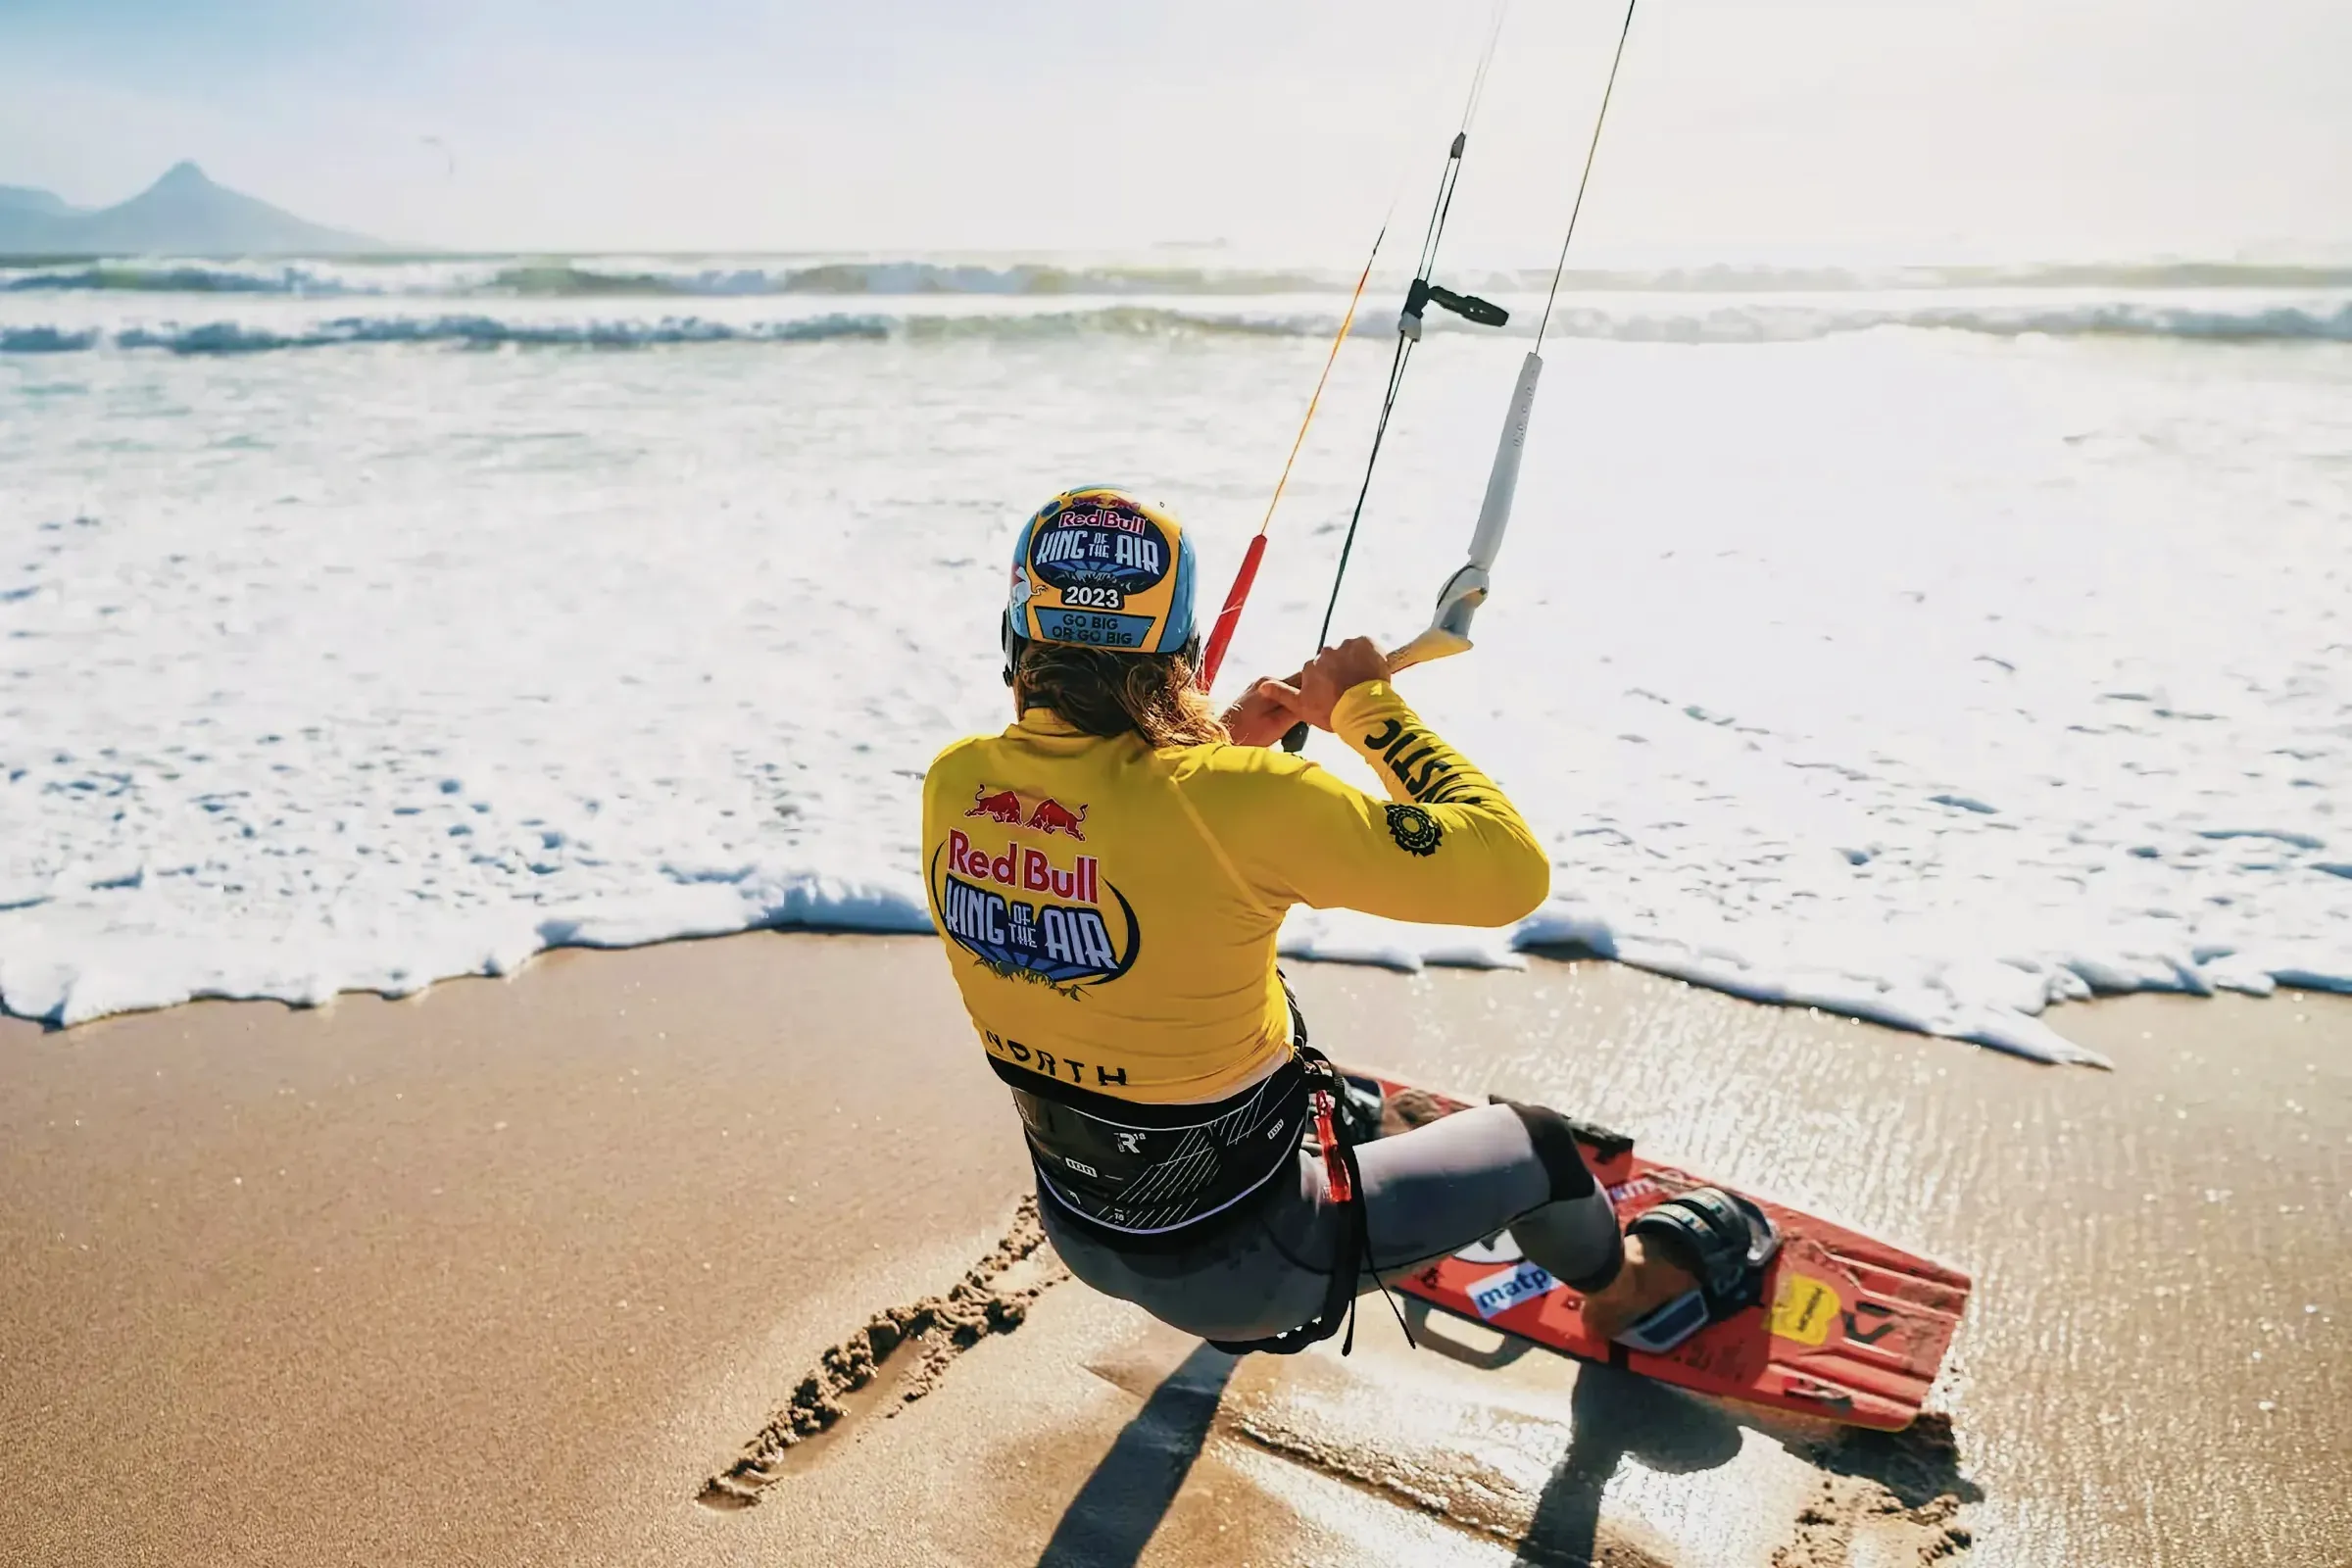 Thrilling kitesurfing at Red Bull King of the Air 2023